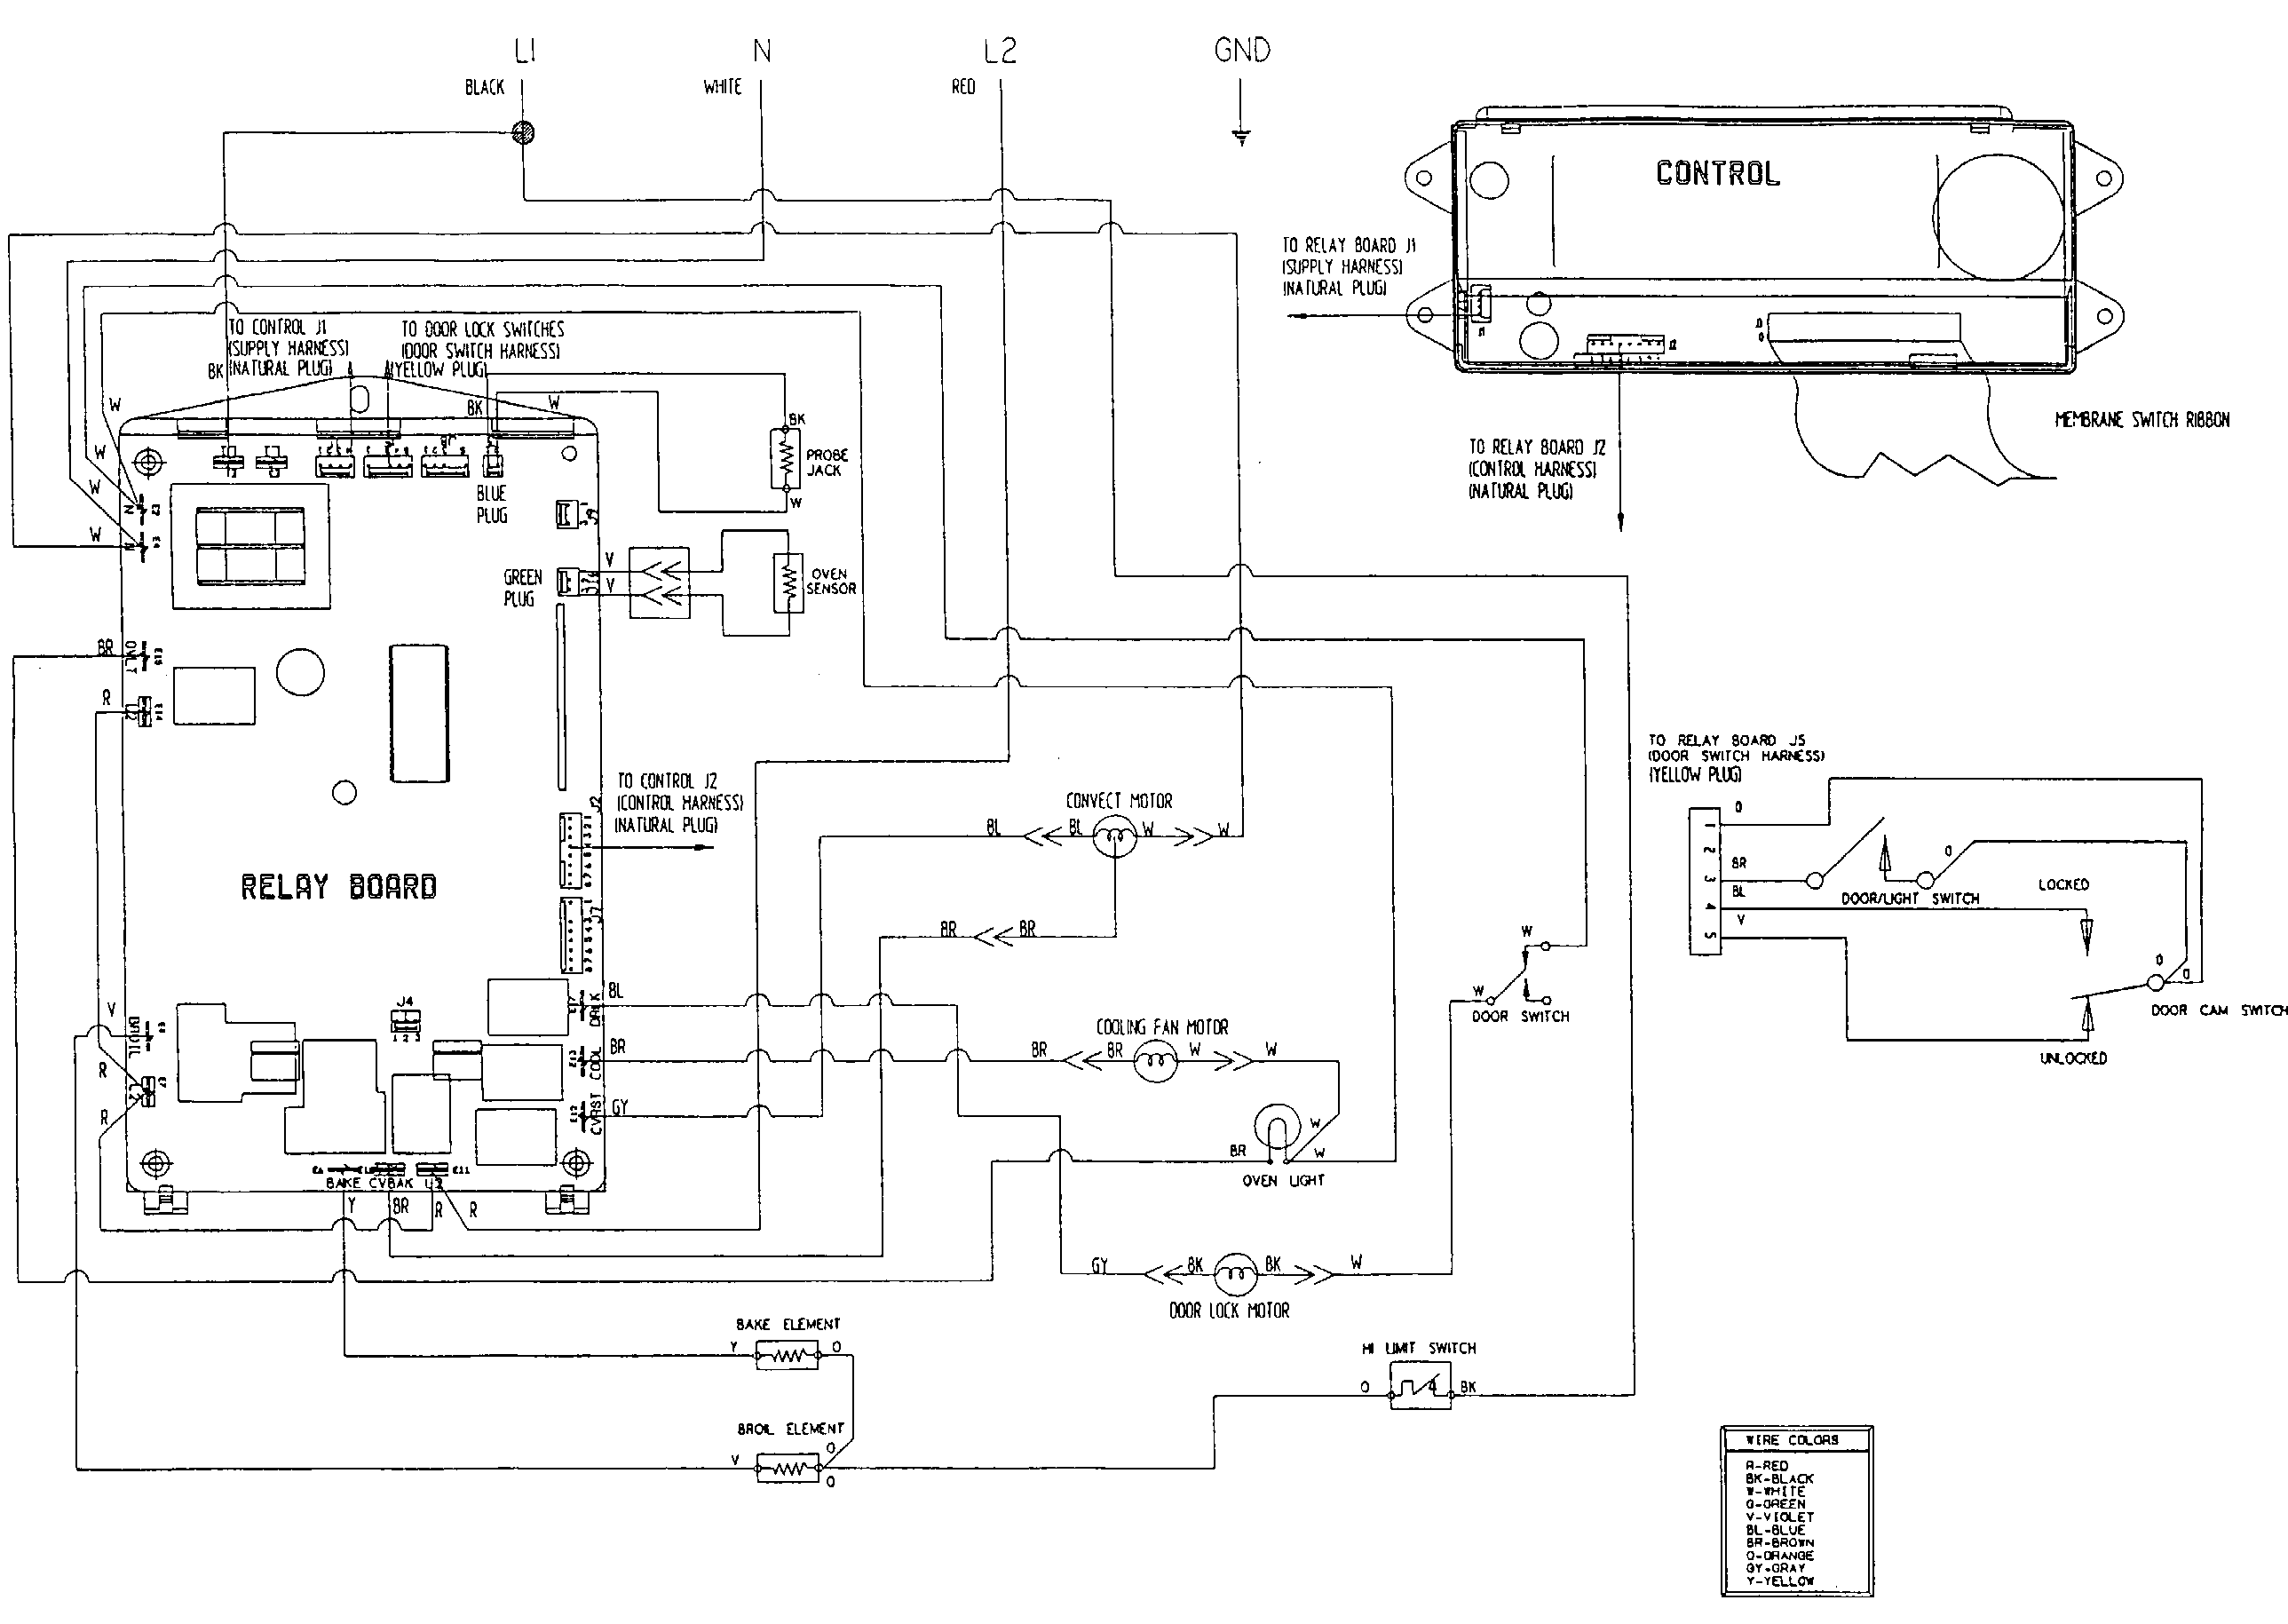 Schematic Electric Stove Wiring Diagram from c.searspartsdirect.com